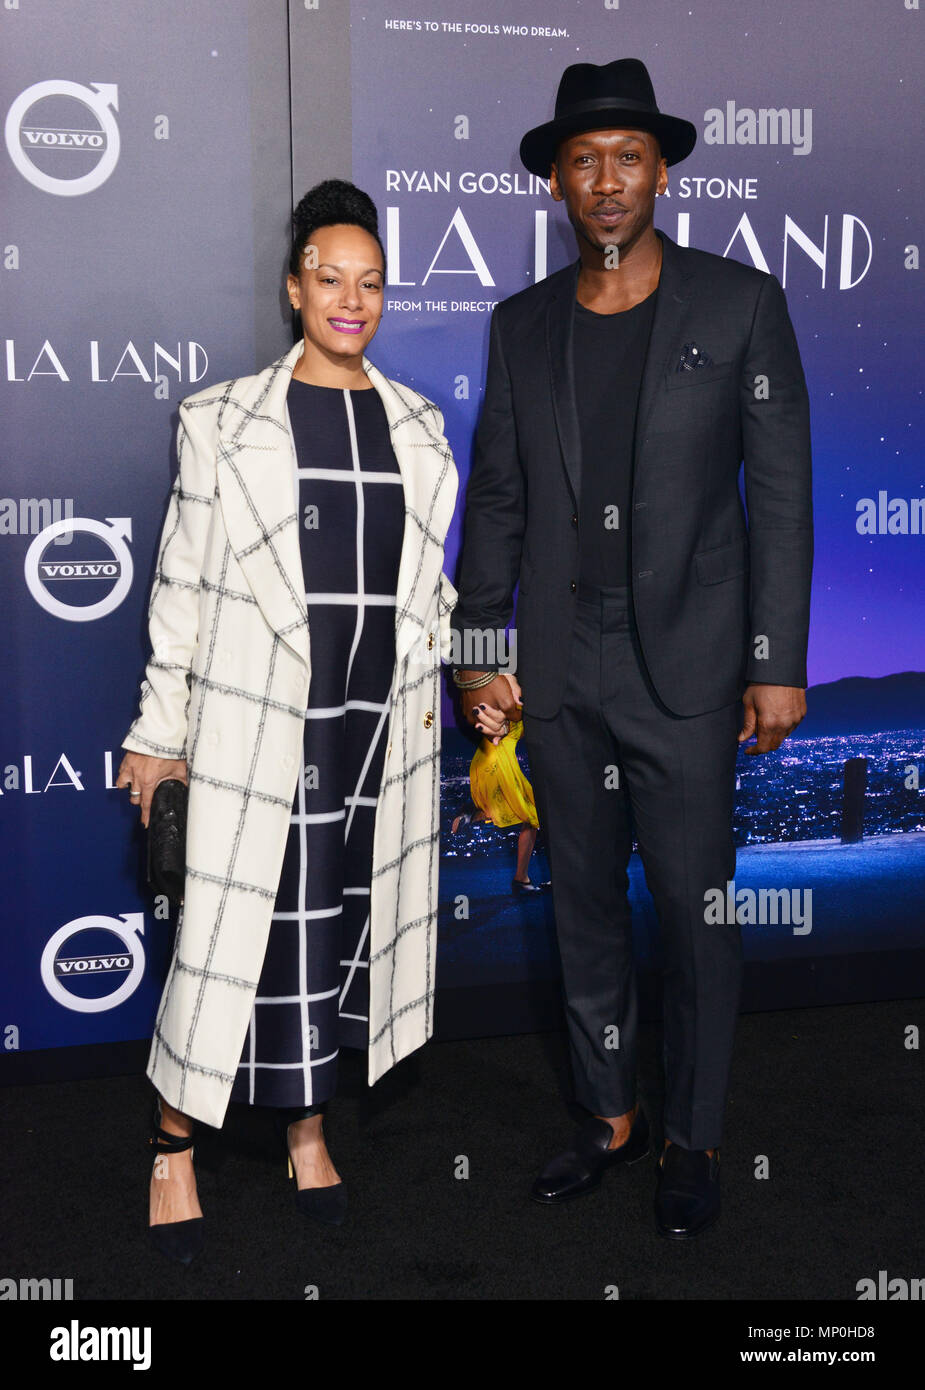 Mahershala Ali, Amatus Ali  at the La La Land premiere at the Westwood Village in Los Angeles. December 6th 2016.Mahershala Ali, Amatus Ali  ------------- Red Carpet Event, Vertical, USA, Film Industry, Celebrities,  Photography, Bestof, Arts Culture and Entertainment, Topix Celebrities fashion /  Vertical, Best of, Event in Hollywood Life - California,  Red Carpet and backstage, USA, Film Industry, Celebrities,  movie celebrities, TV celebrities, Music celebrities, Photography, Bestof, Arts Culture and Entertainment,  Topix, vertical,  family from from the year , 2016, inquiry tsuni@Gamma-USA Stock Photo